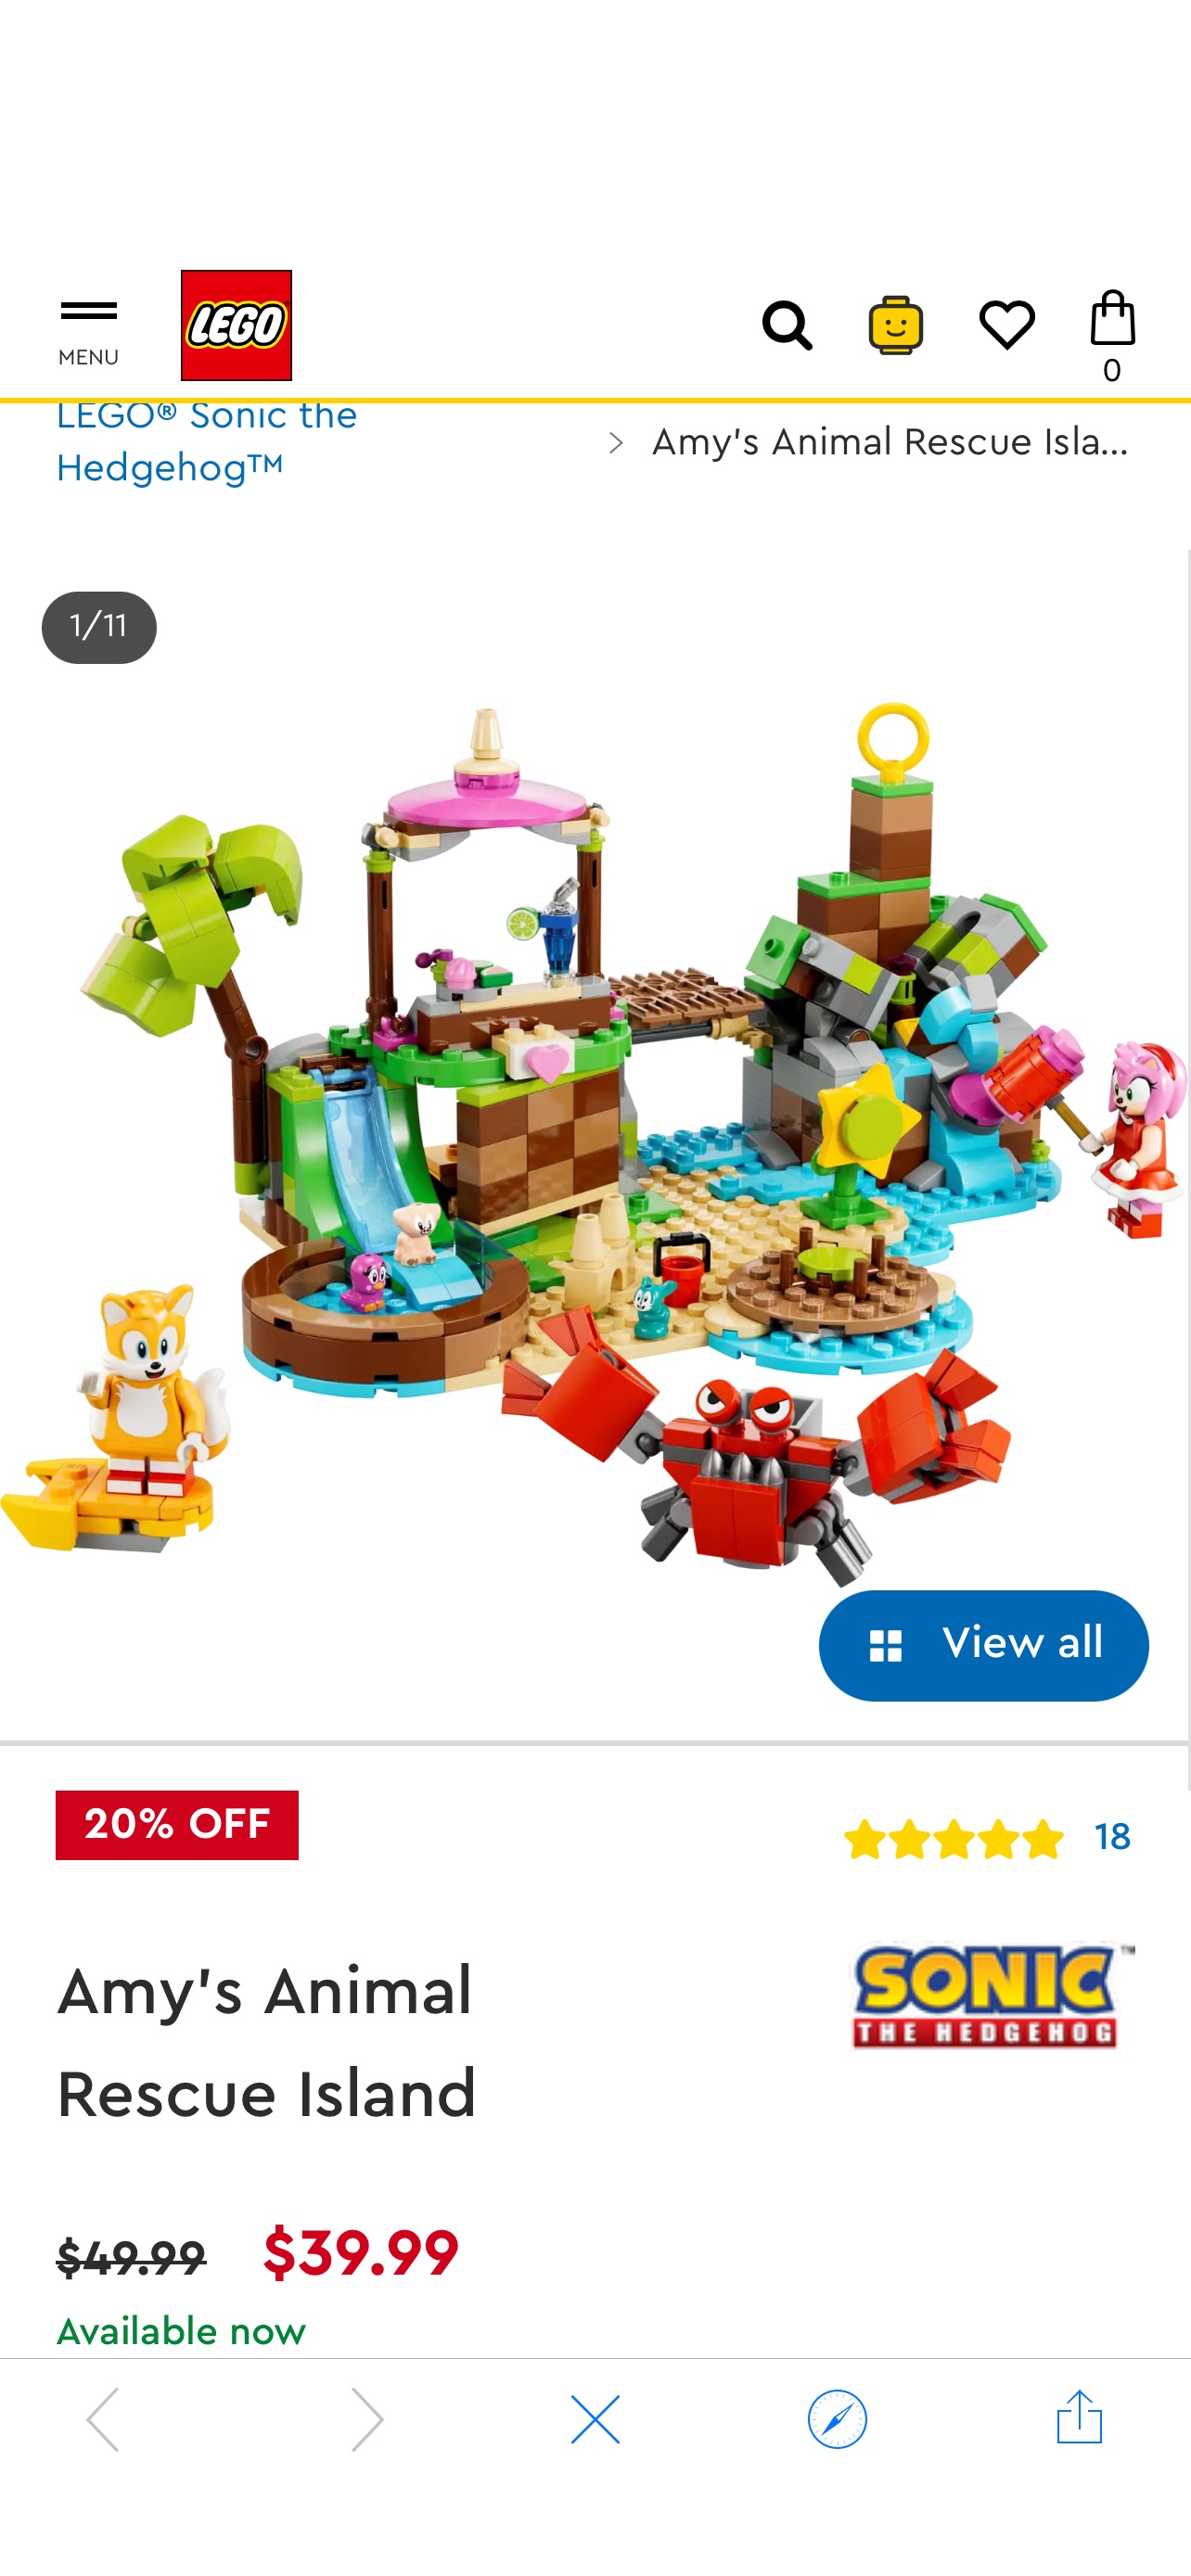 Amy's Animal Rescue Island 76992 | LEGO® Sonic the Hedgehog™ | Buy online at the Official LEGO® Shop US 动物救援岛